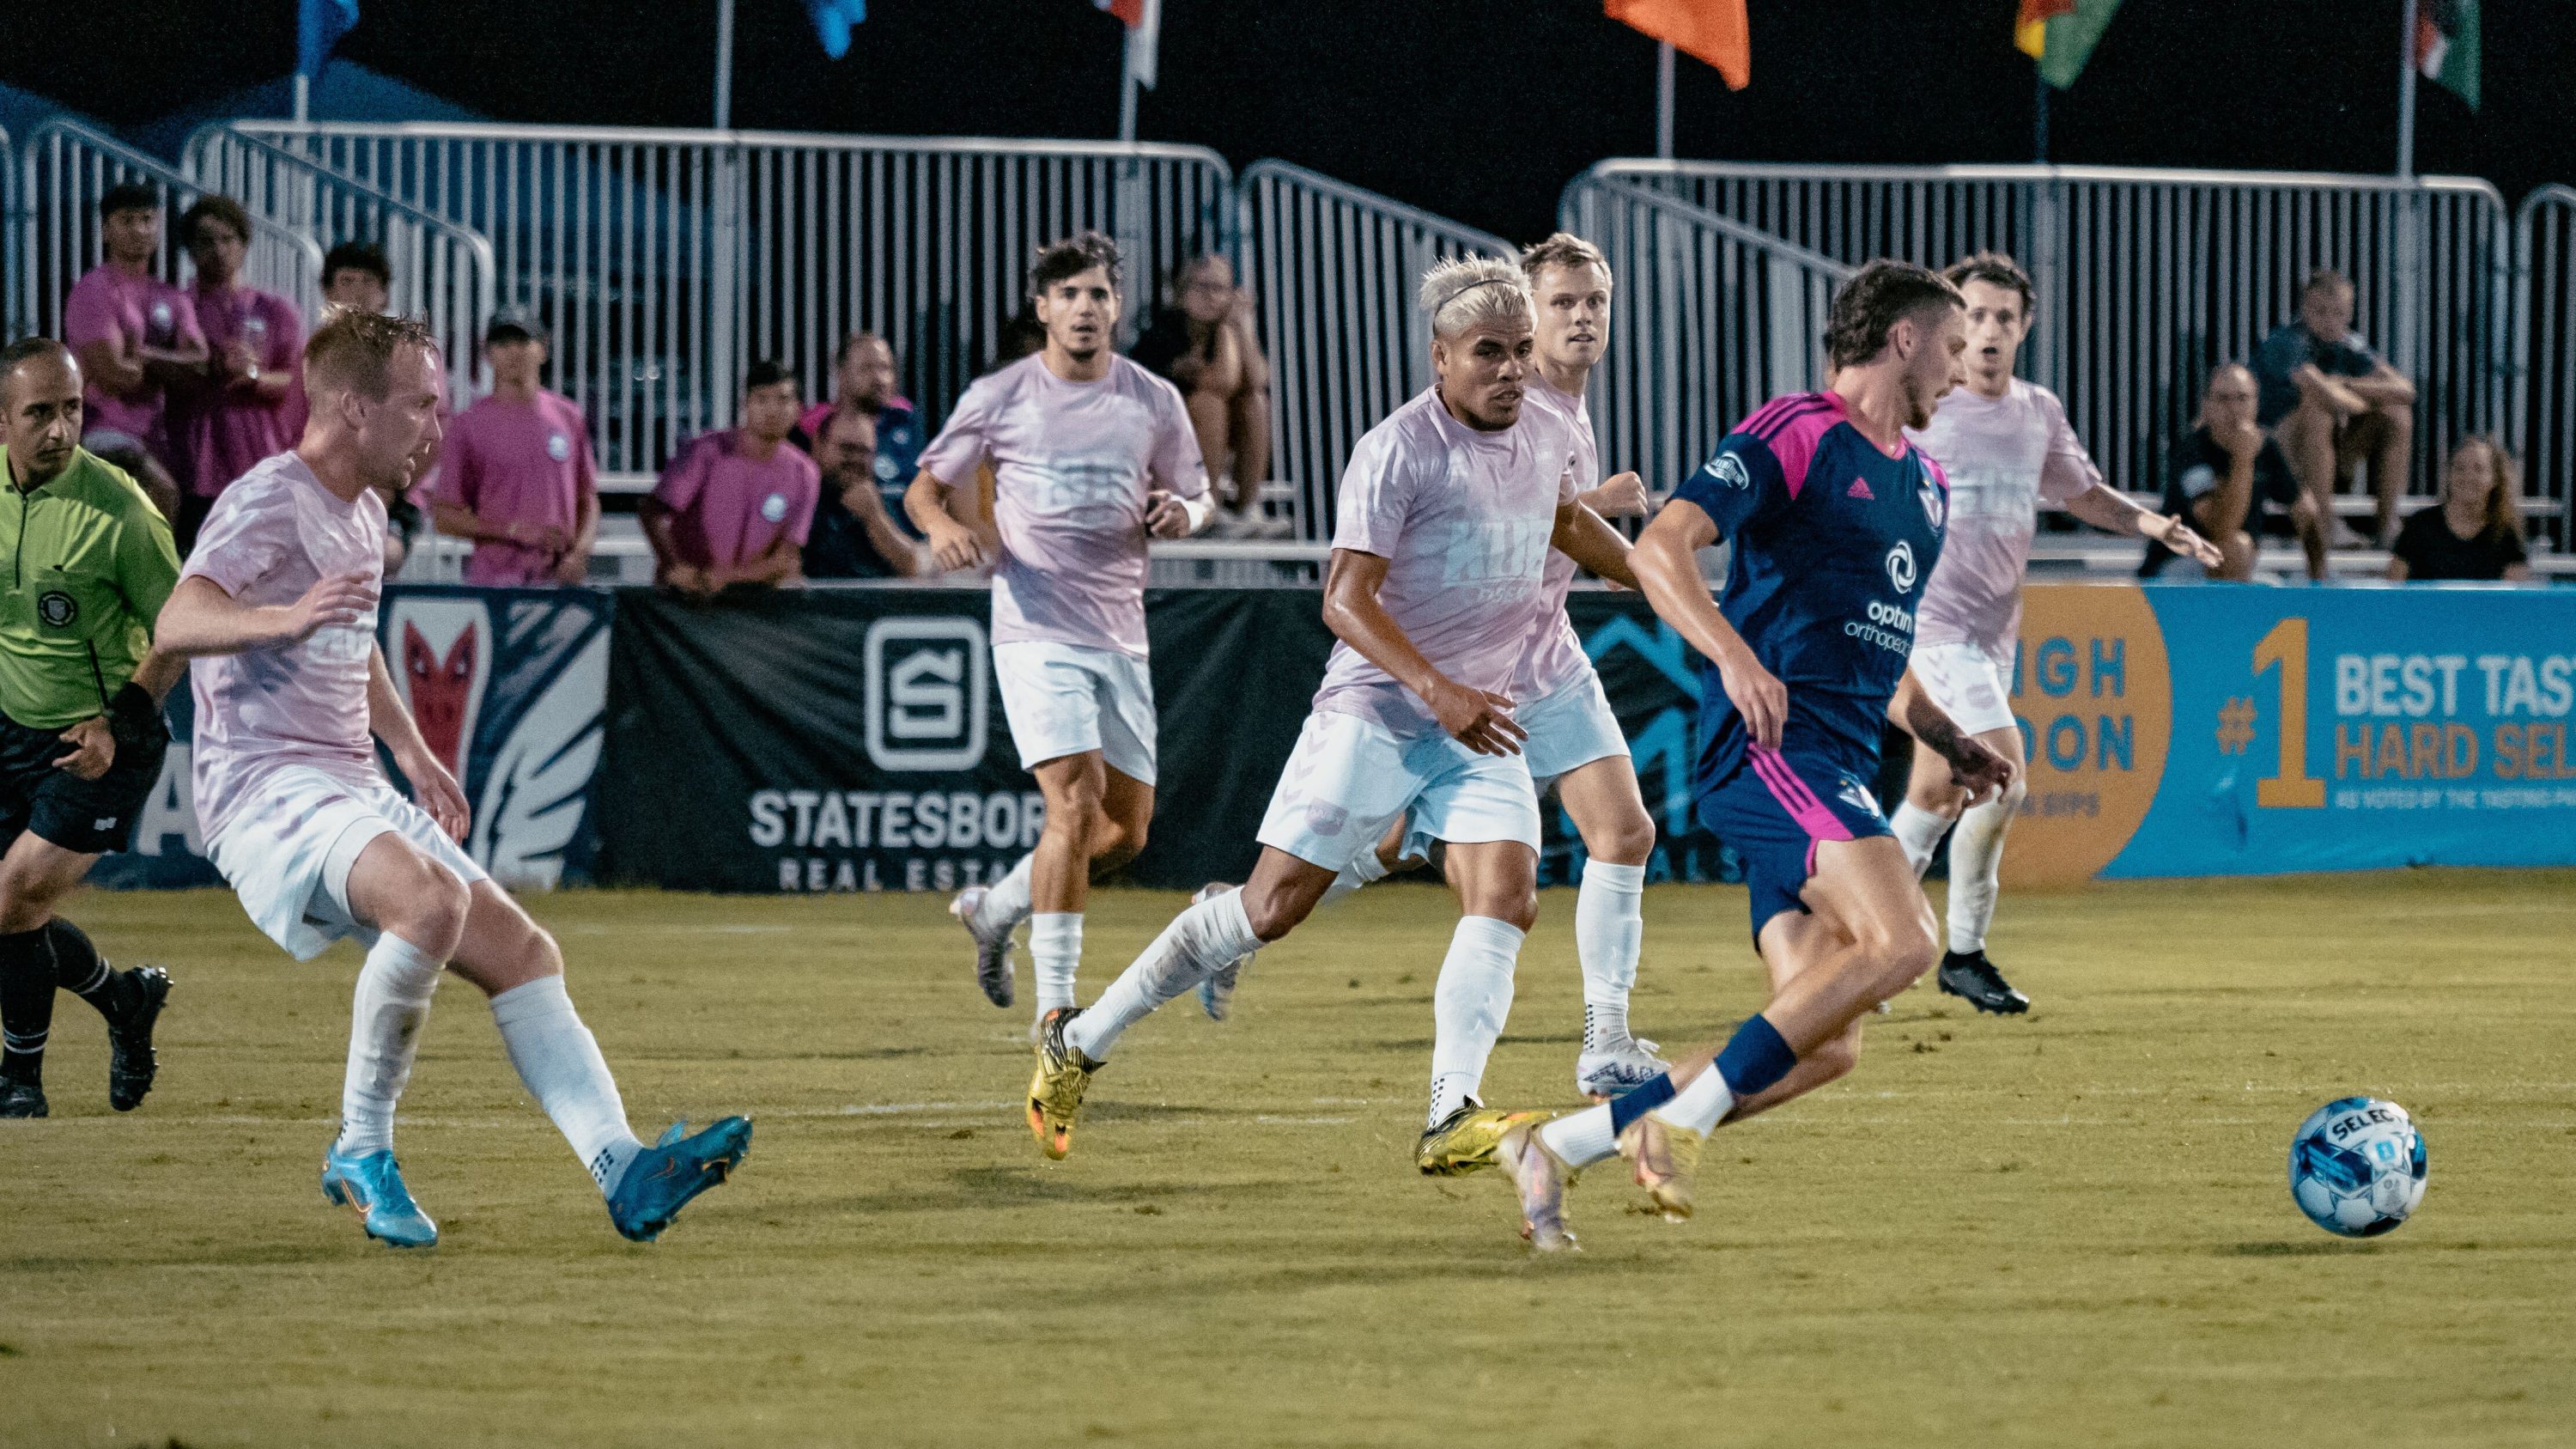 Match Forecast: Tormenta FC vs. One Knoxville SC featured image